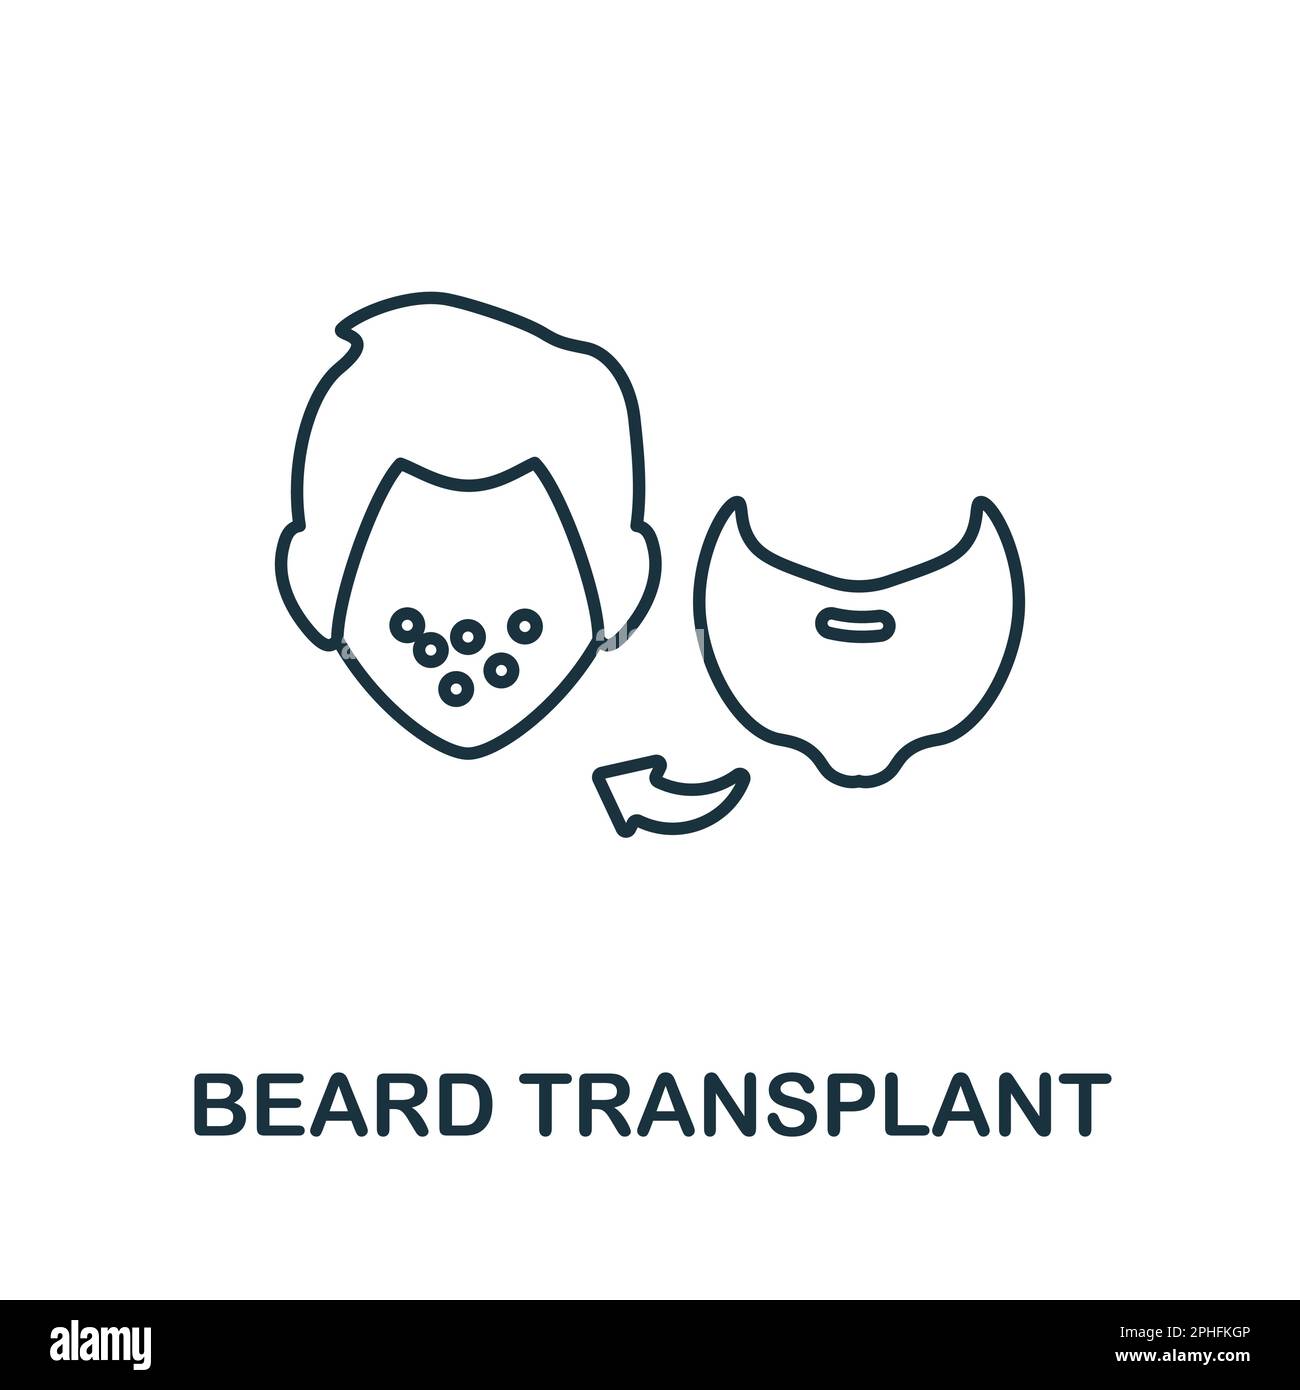 Beard Transplant line icon. Element sign from transplantation collection. Flat Beard Transplant outline icon sign for web design, infographics and Stock Vector